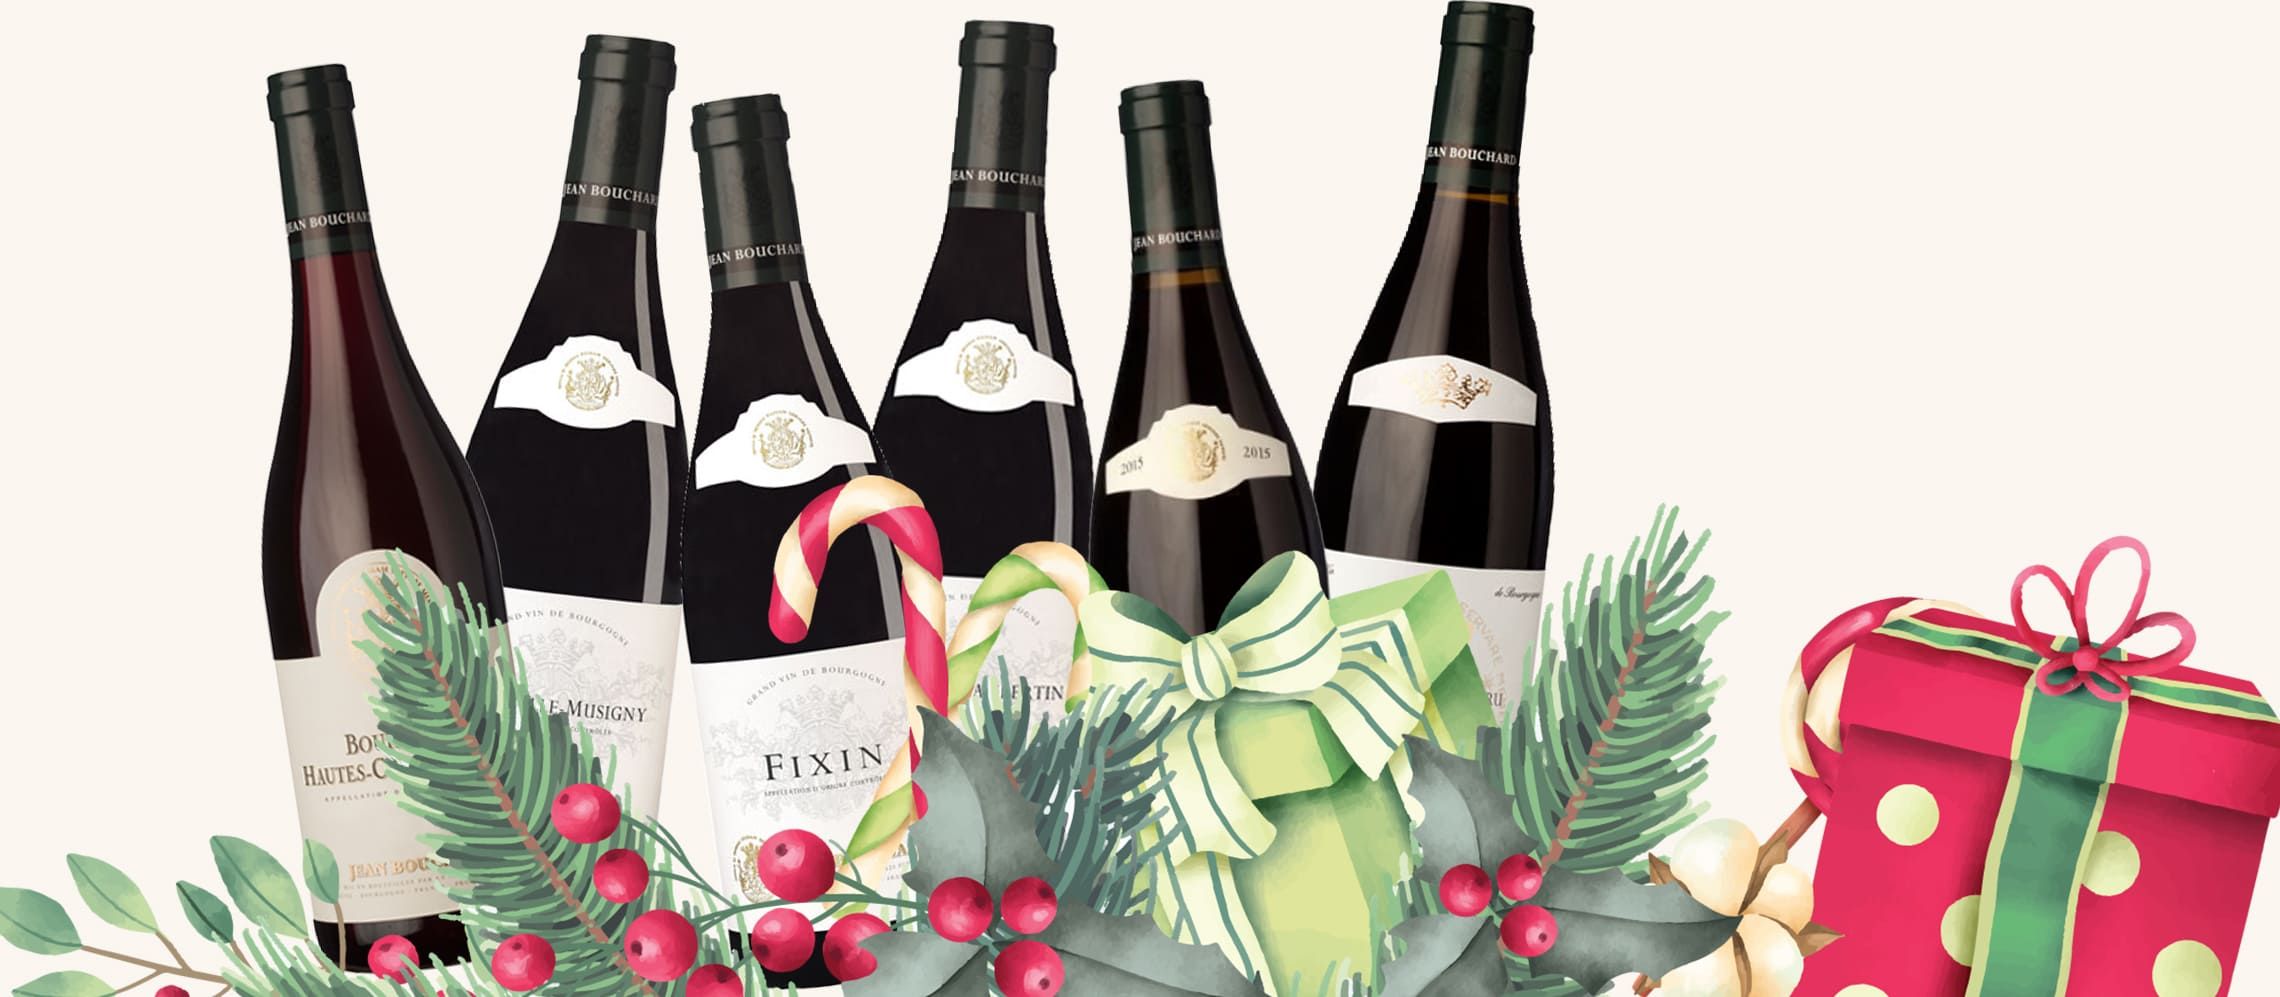 Photo for: 6 Best Wines by Jean Bouchard To Try This Christmas